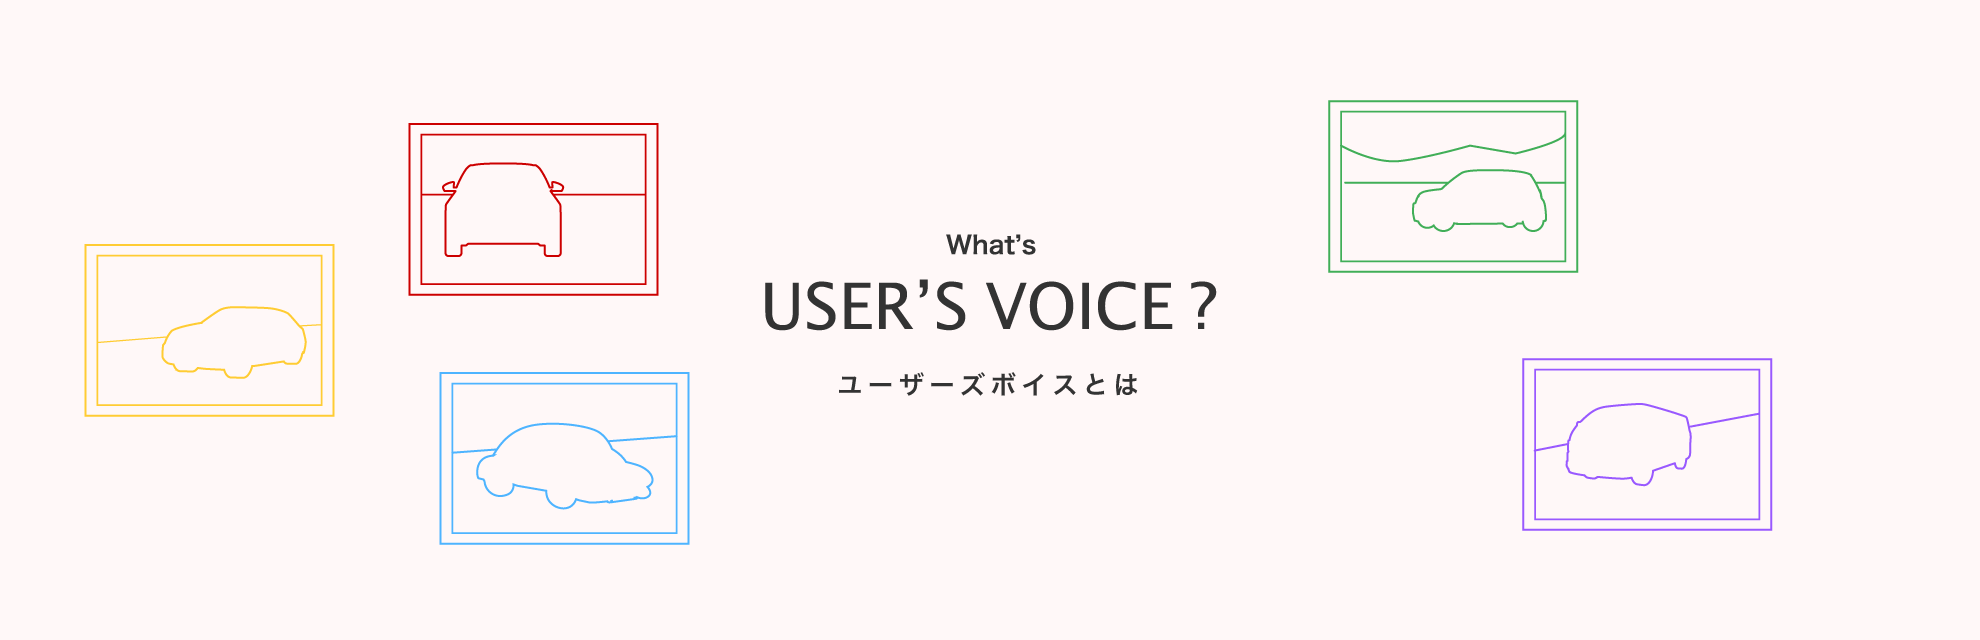 What’s USER’S VOICE?